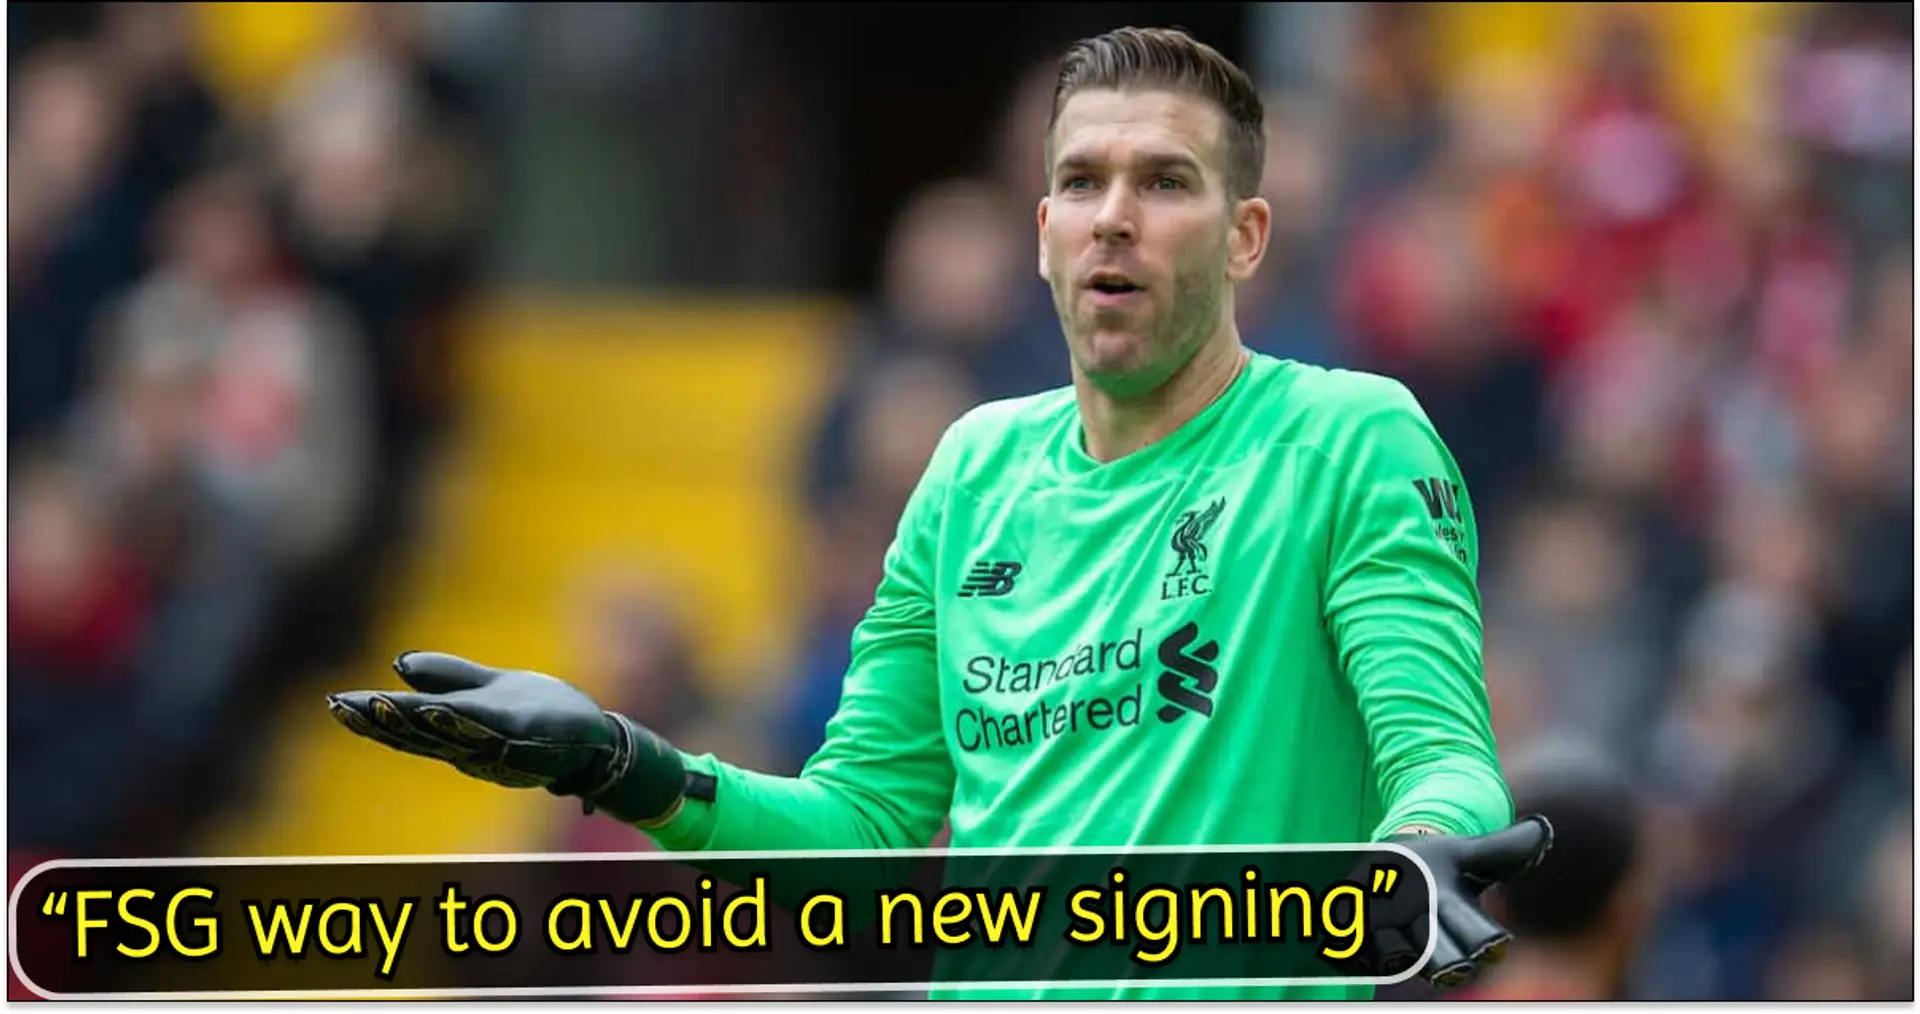 'One of the dumbest things I’ve seen': Liverpool fans unhappy with Adrian contract extension for one reason